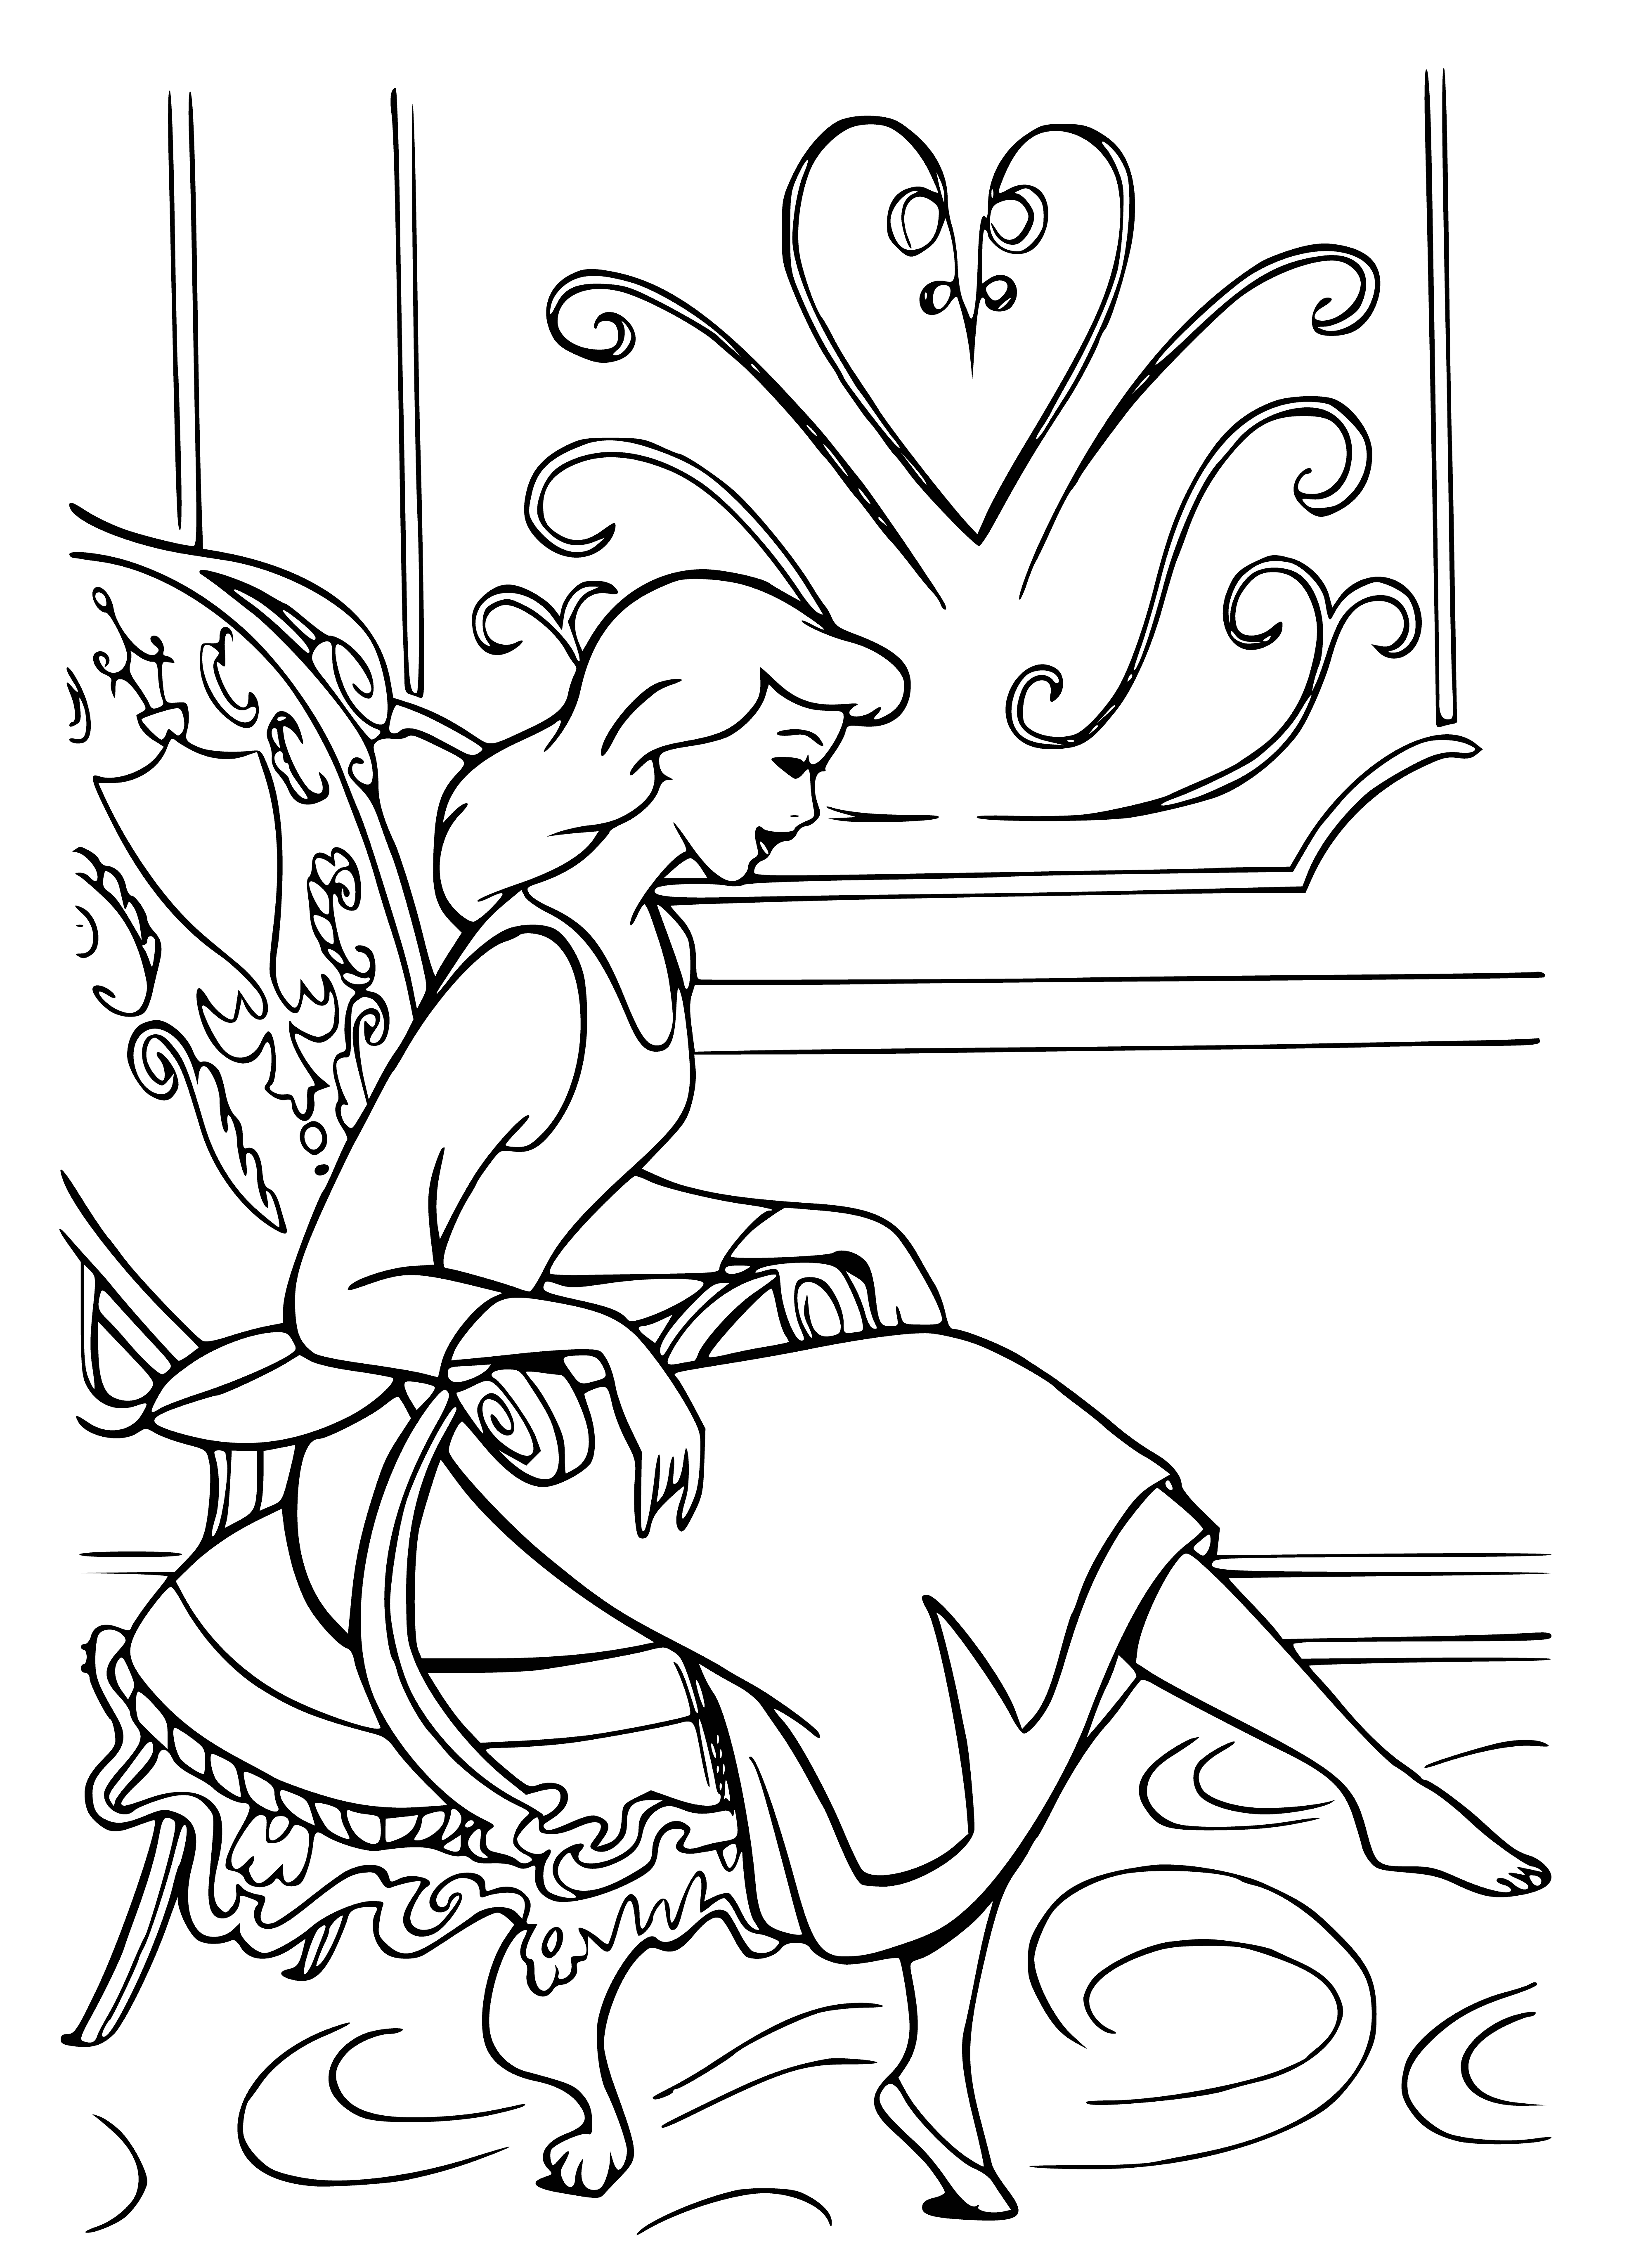 coloring page: Someone measuring a glass slipper with a tape is seen on this coloring page.